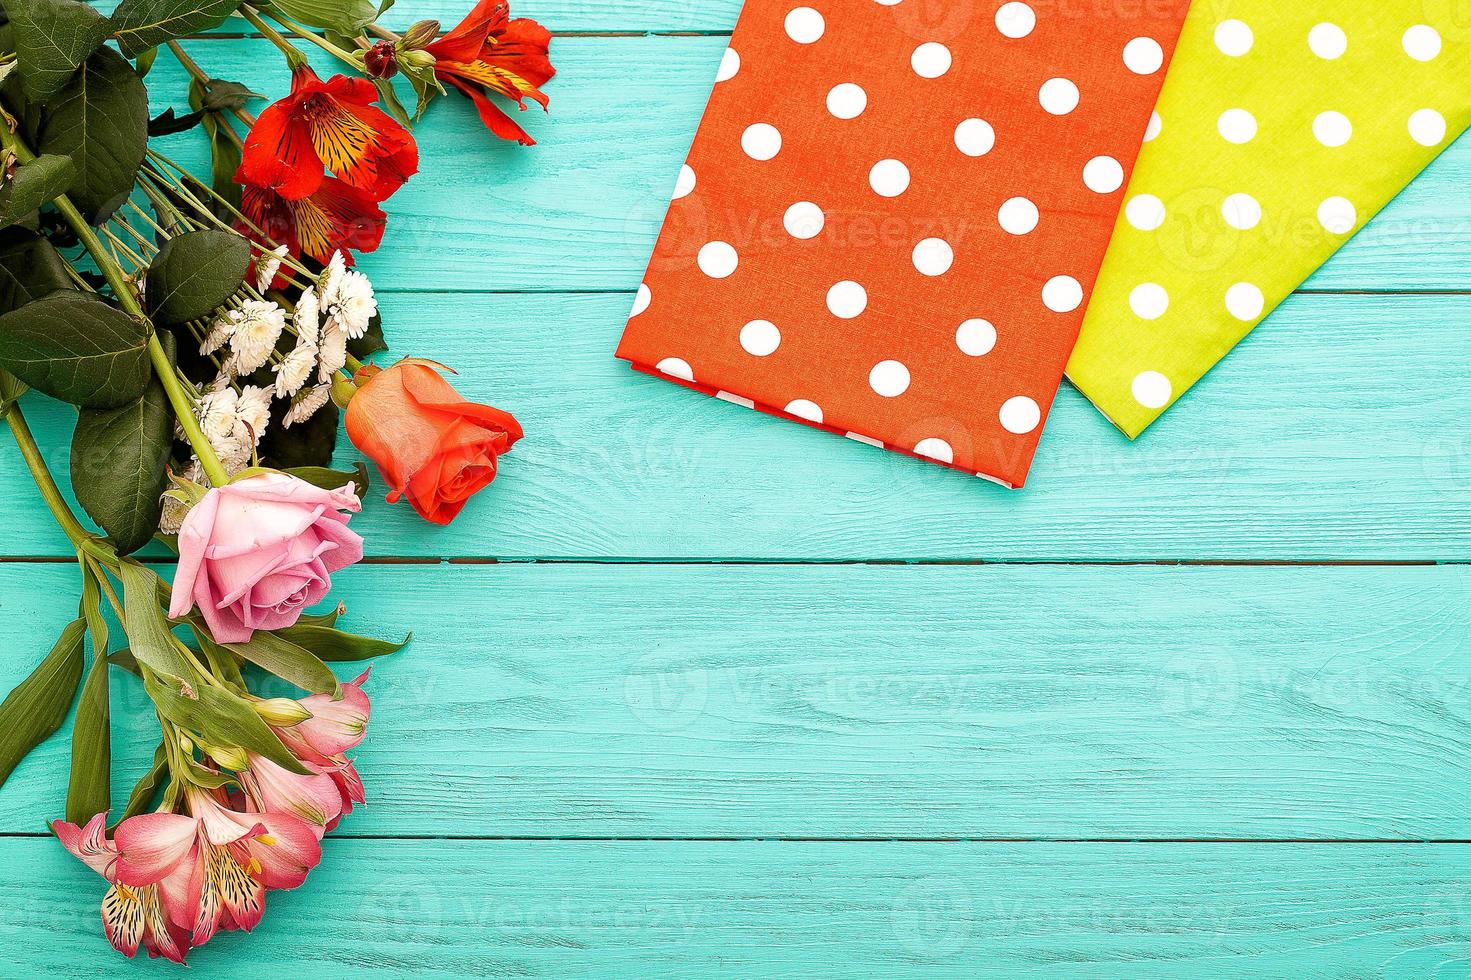 Frame of flowers and towels in polka dots on blue wooden background. Top view and selective focus. Copy space photo